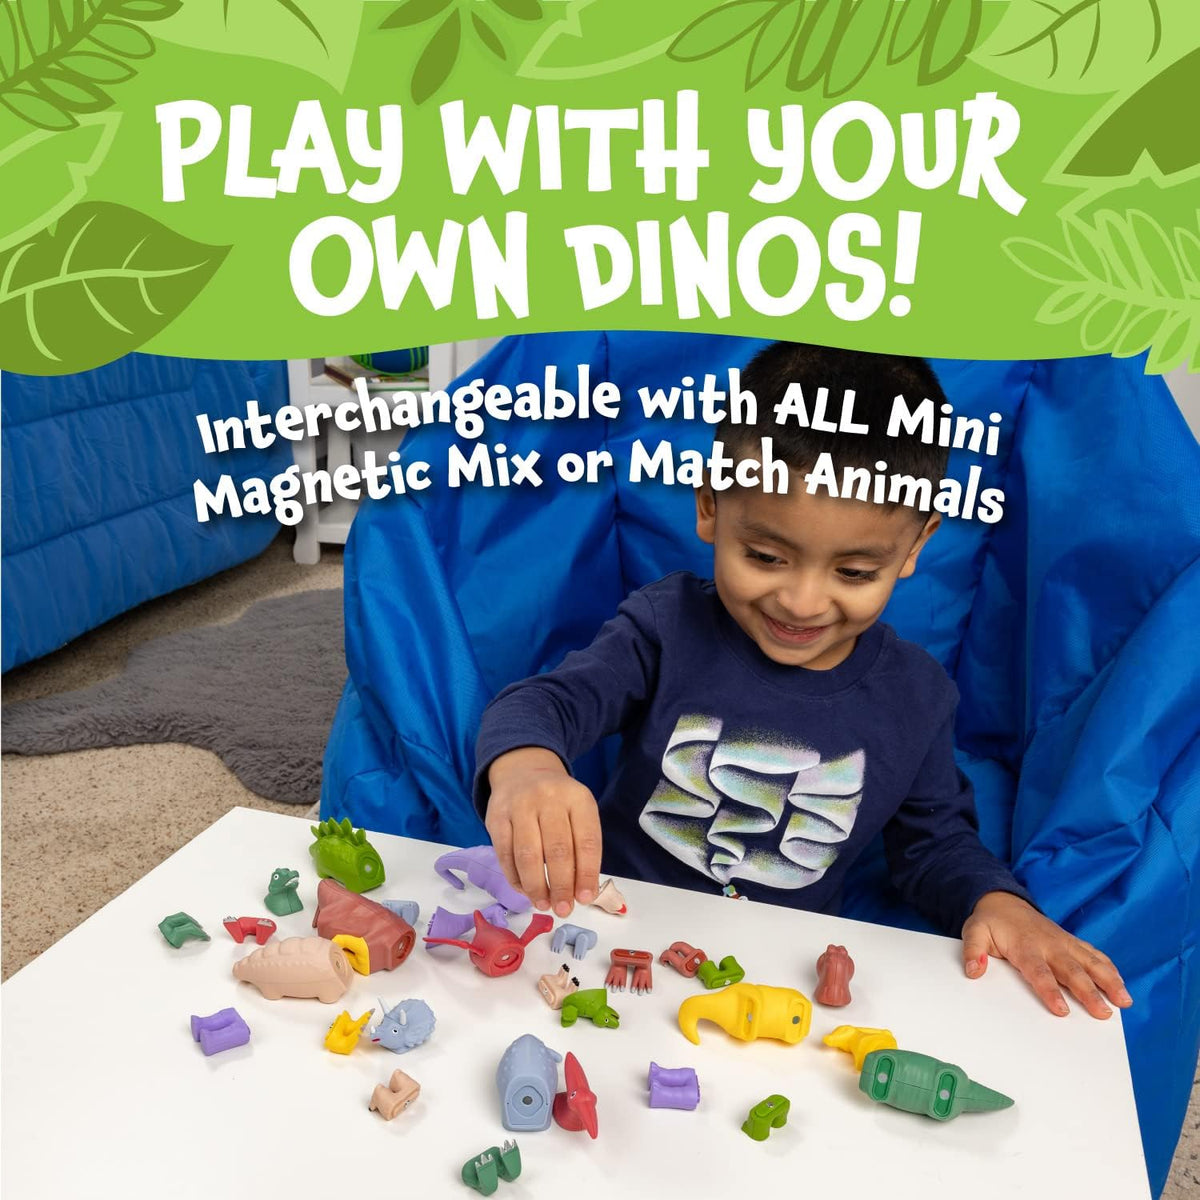 Mini Magnetic Mix Or Match Dinosaurs 1